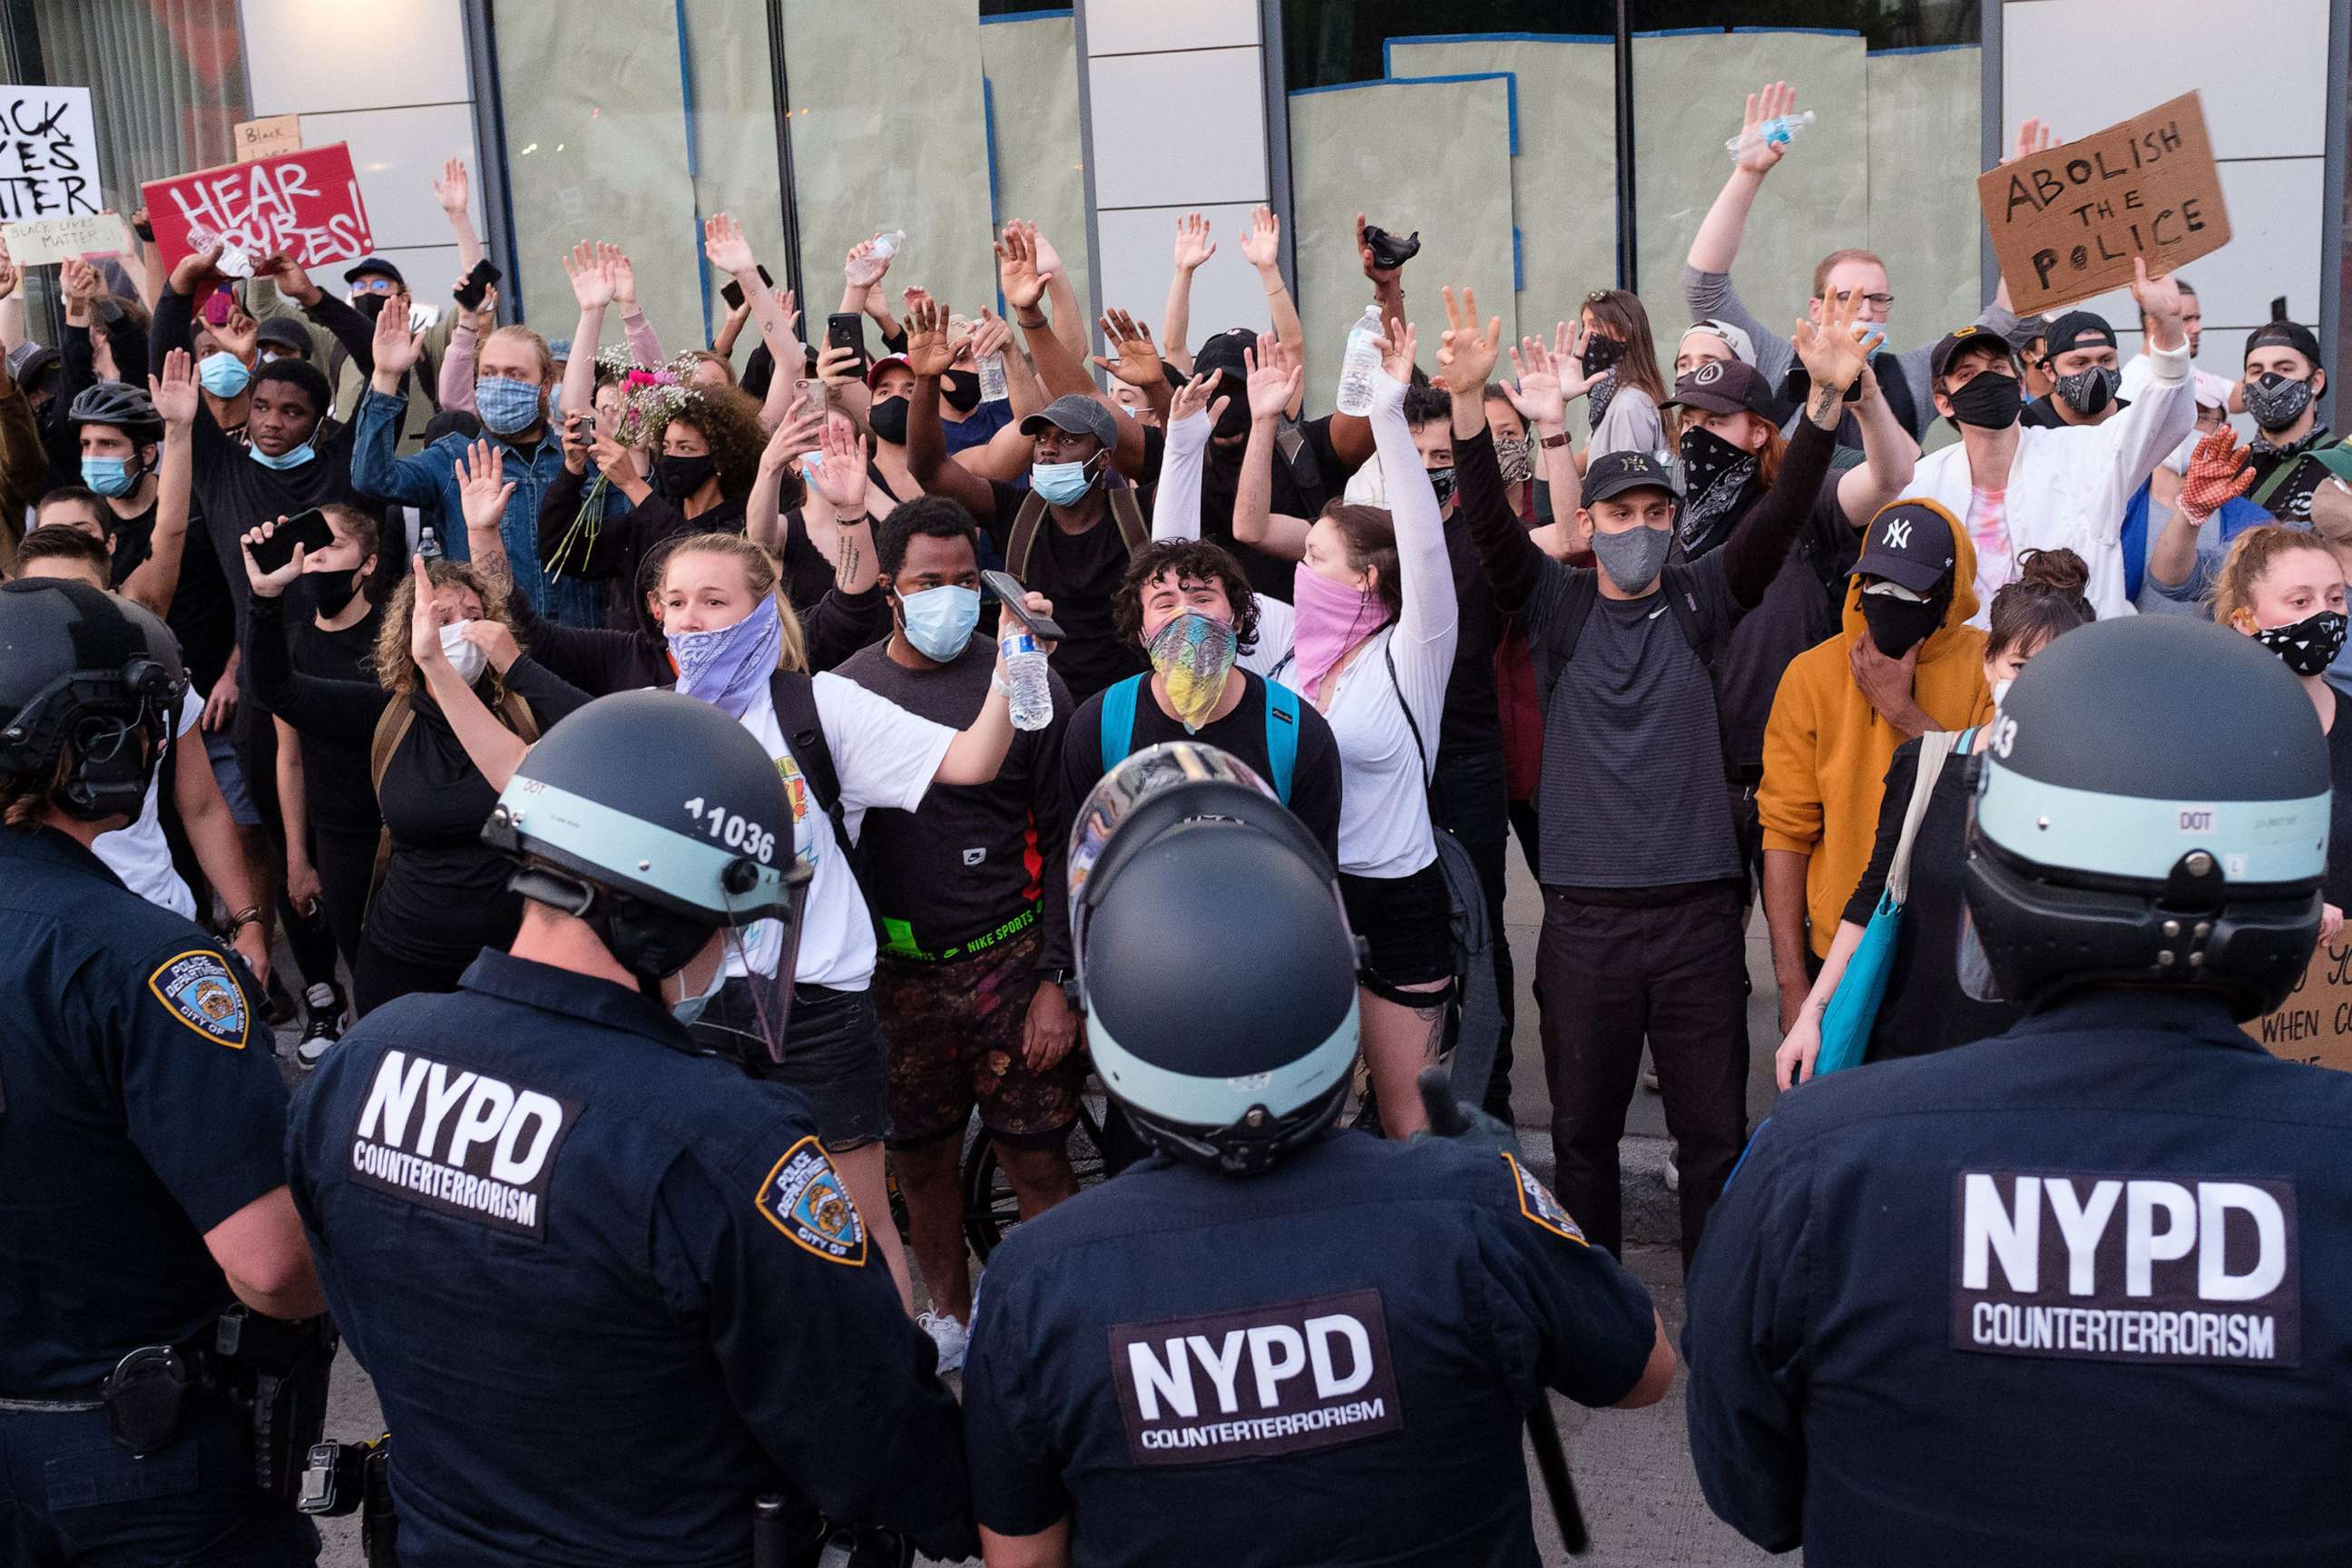 PHOTO: Protesters take over the roadway of the Manhattan Bridge in Brooklyn, New York City during a protest against police brutality and the death of George Floyd, May 31, 2020.